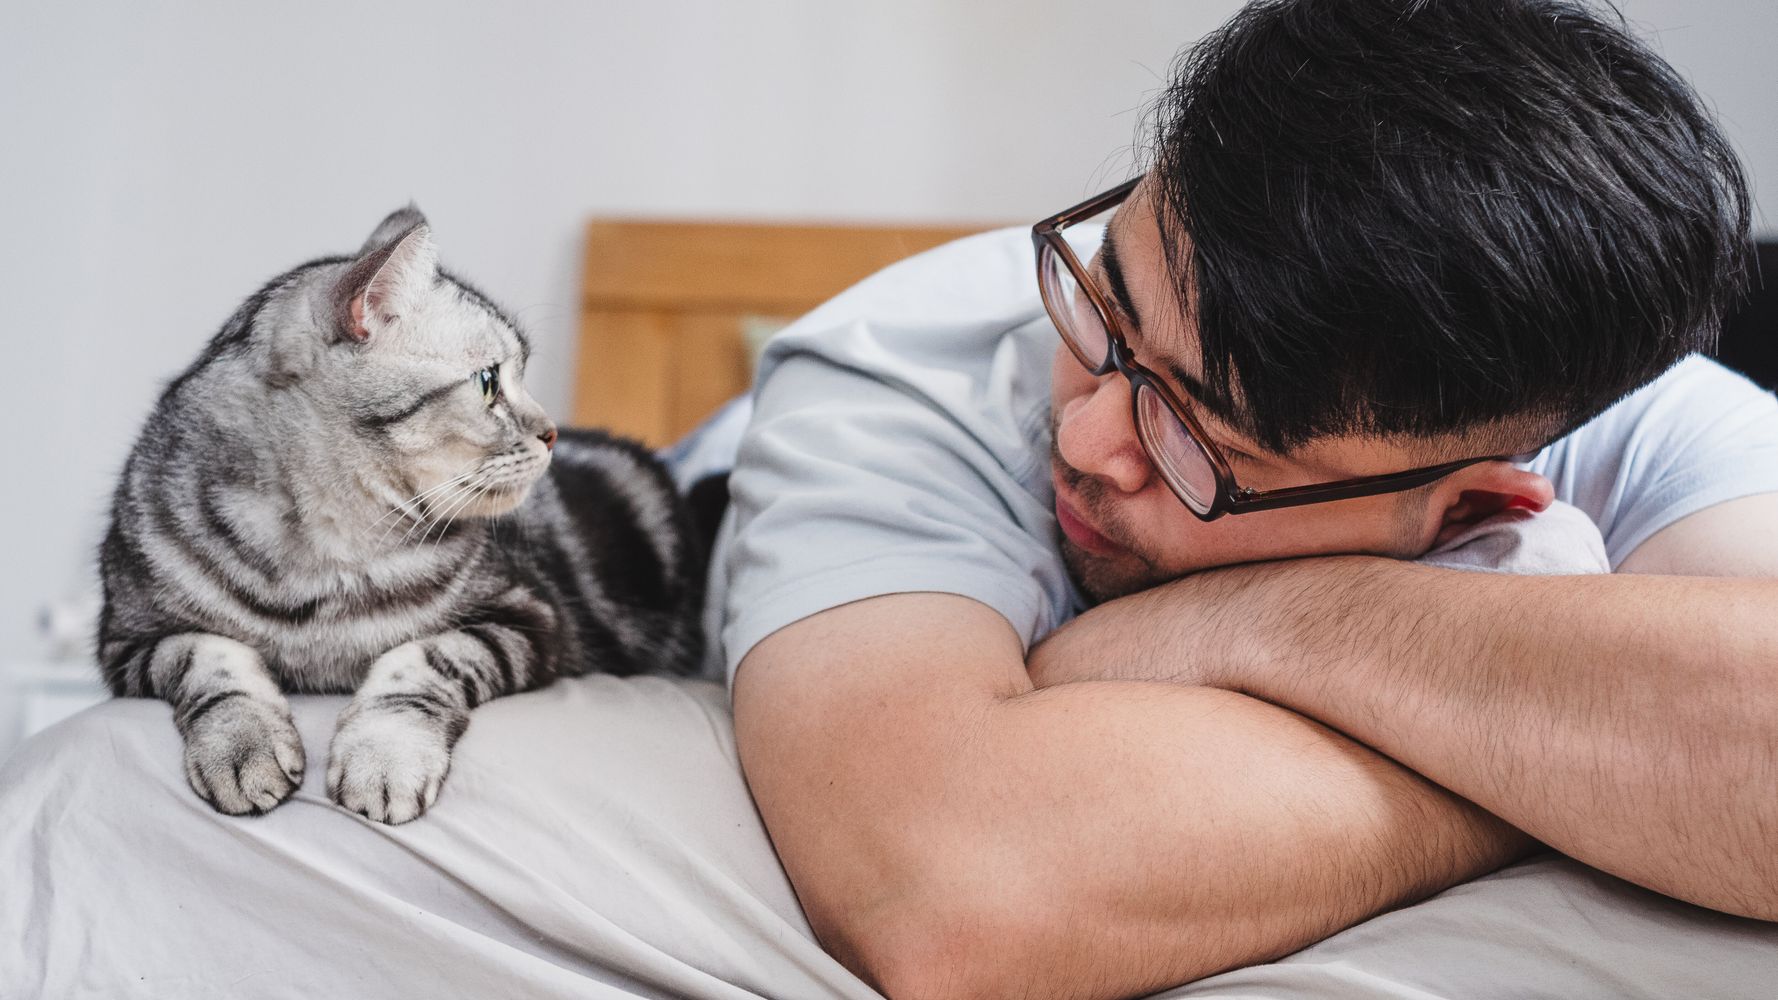 Are You A First Time Cat Owner? These Items Will Make You And Your Cat Happier